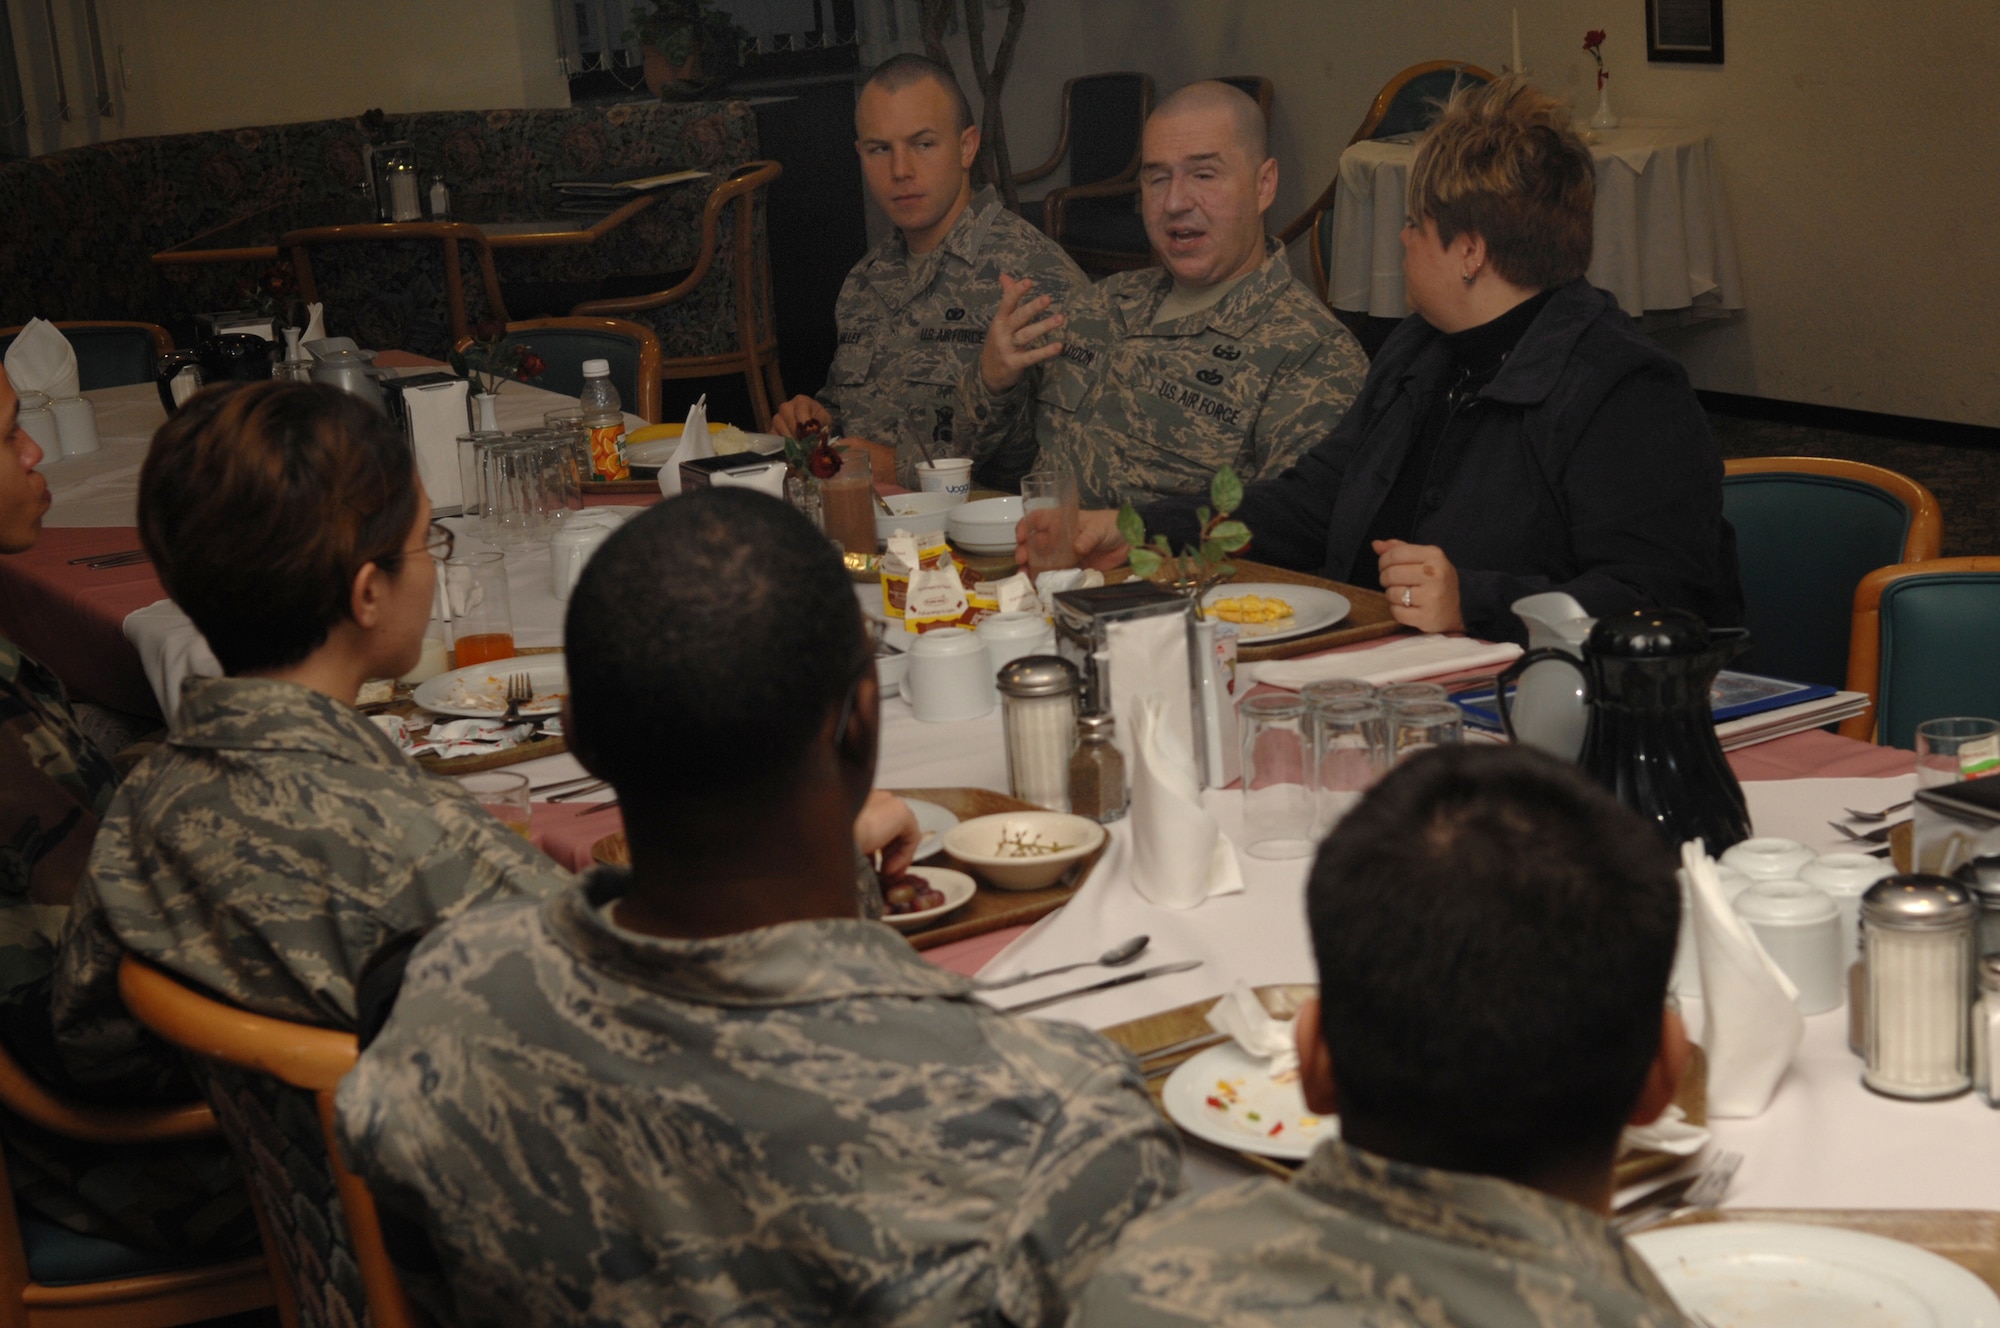 Staff Sgt. Matthew Slaydon and his wife, Annette, speak with airmen over breakfast at the Rheinland Inn Dining Facility, Ramstein Air Base, Germany, Nov. 21, 2008. Sgt. Slaydon was severely injured in Iraq 13 months ago during a deployment there as an explosive ordinance disposal technician and is visiting Ramstein as part of a morale tour, following his recovery. (U.S. Air Force photo by Airman 1st Class Tony R. Ritter)